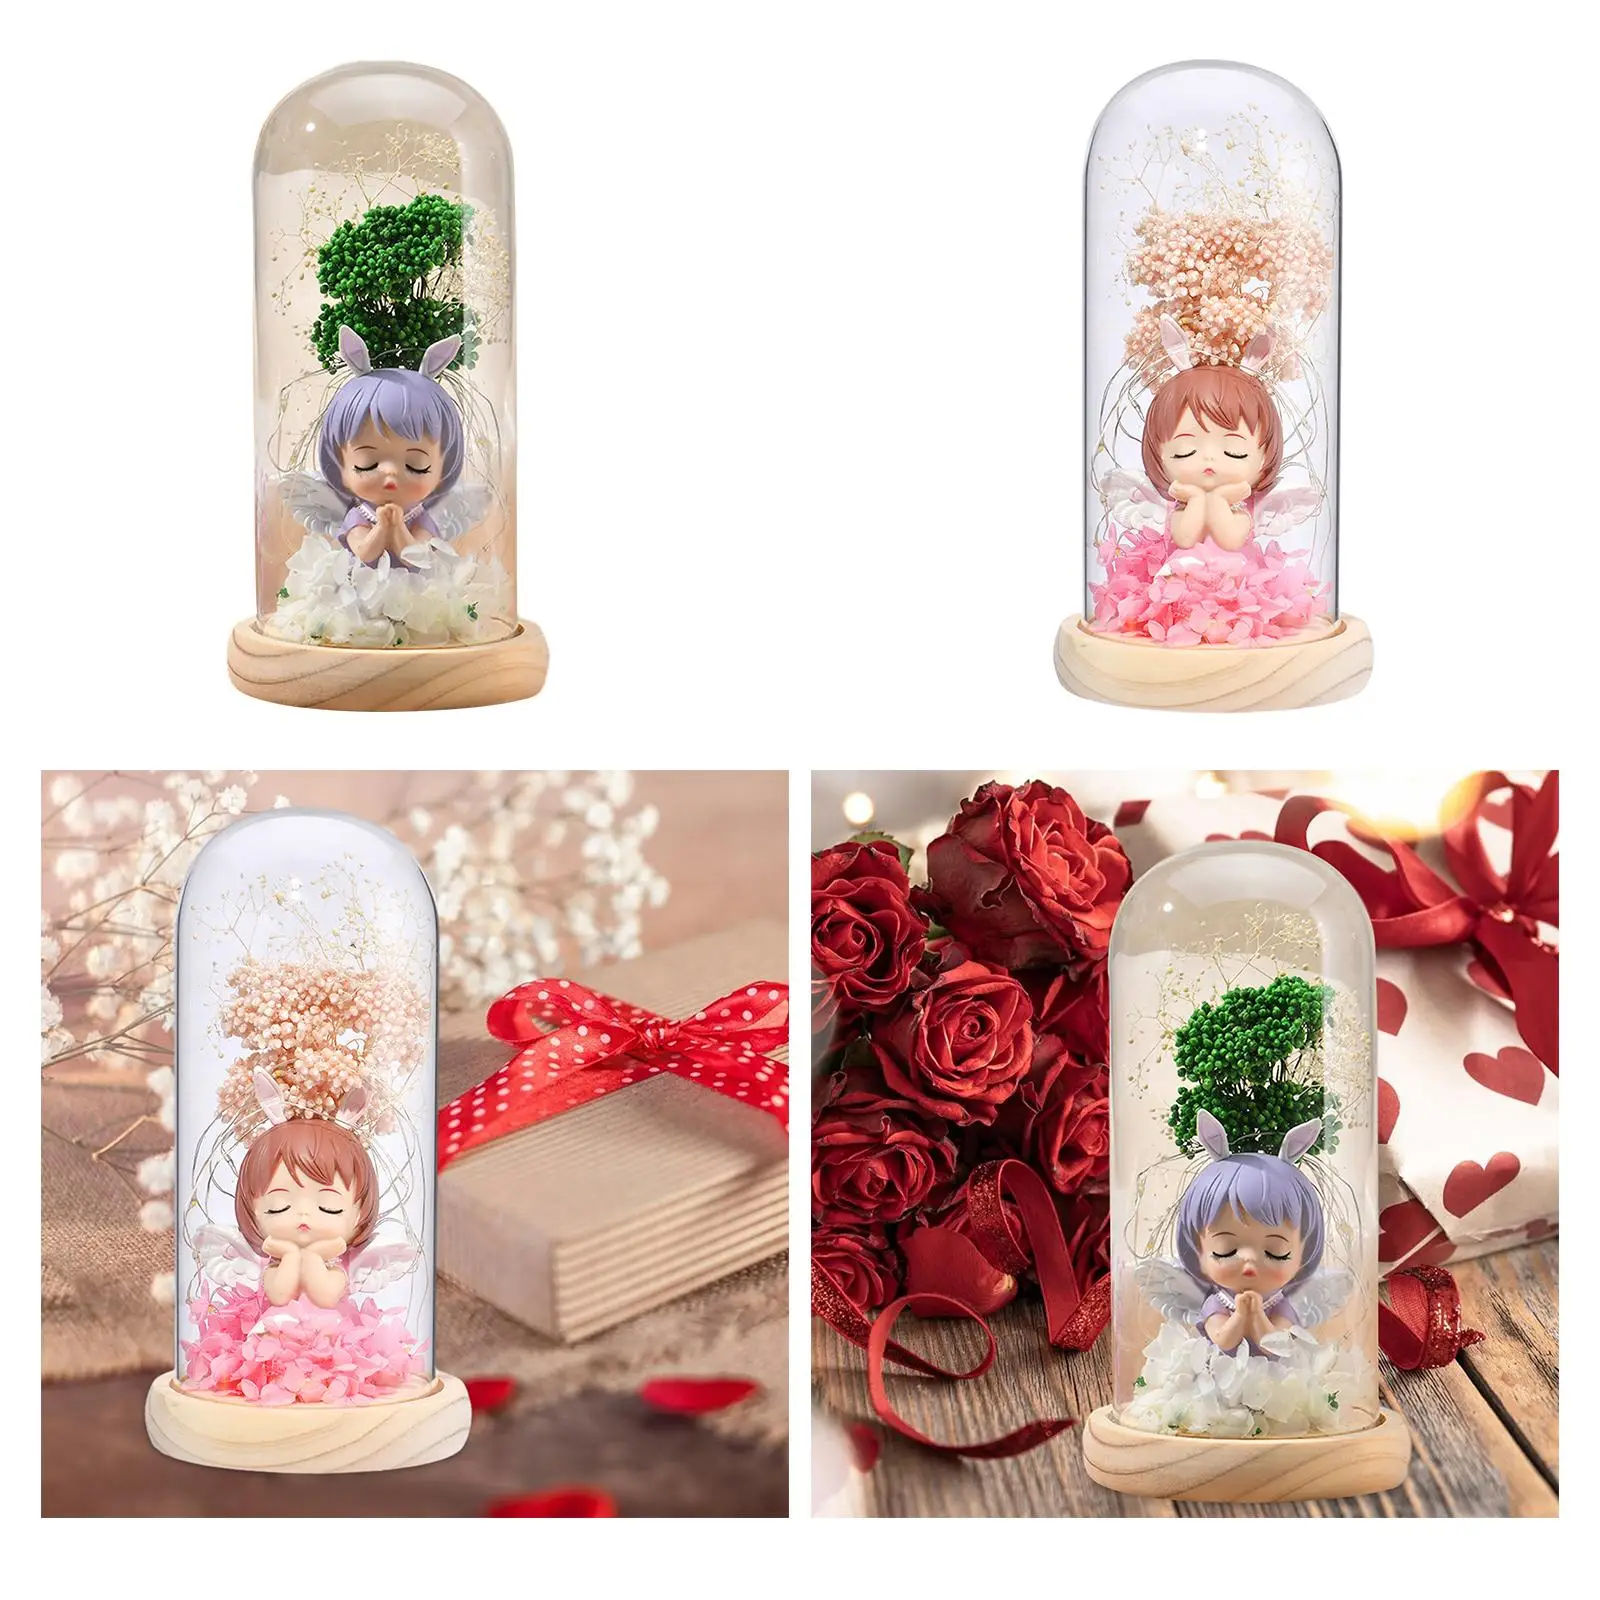 Cute Doll Glass Cover for Valentines Day Valentines Day Gifts for Kids for Anniversary Gifts Family Members Friends Male Men